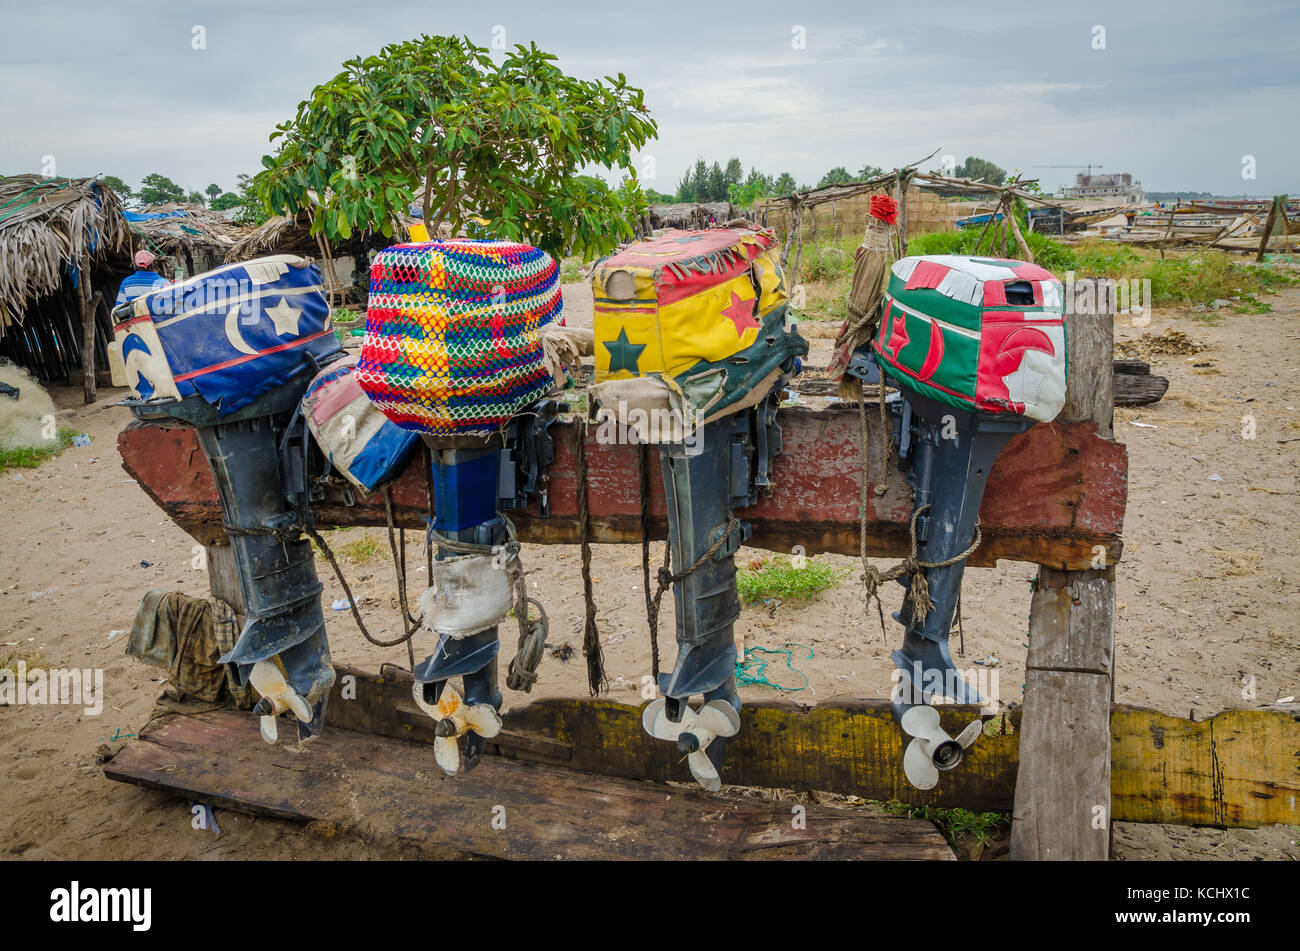 Colorful lined up fishing boat engines with artistic covers on wooden stand, The Gambia, West Africa Stock Photo